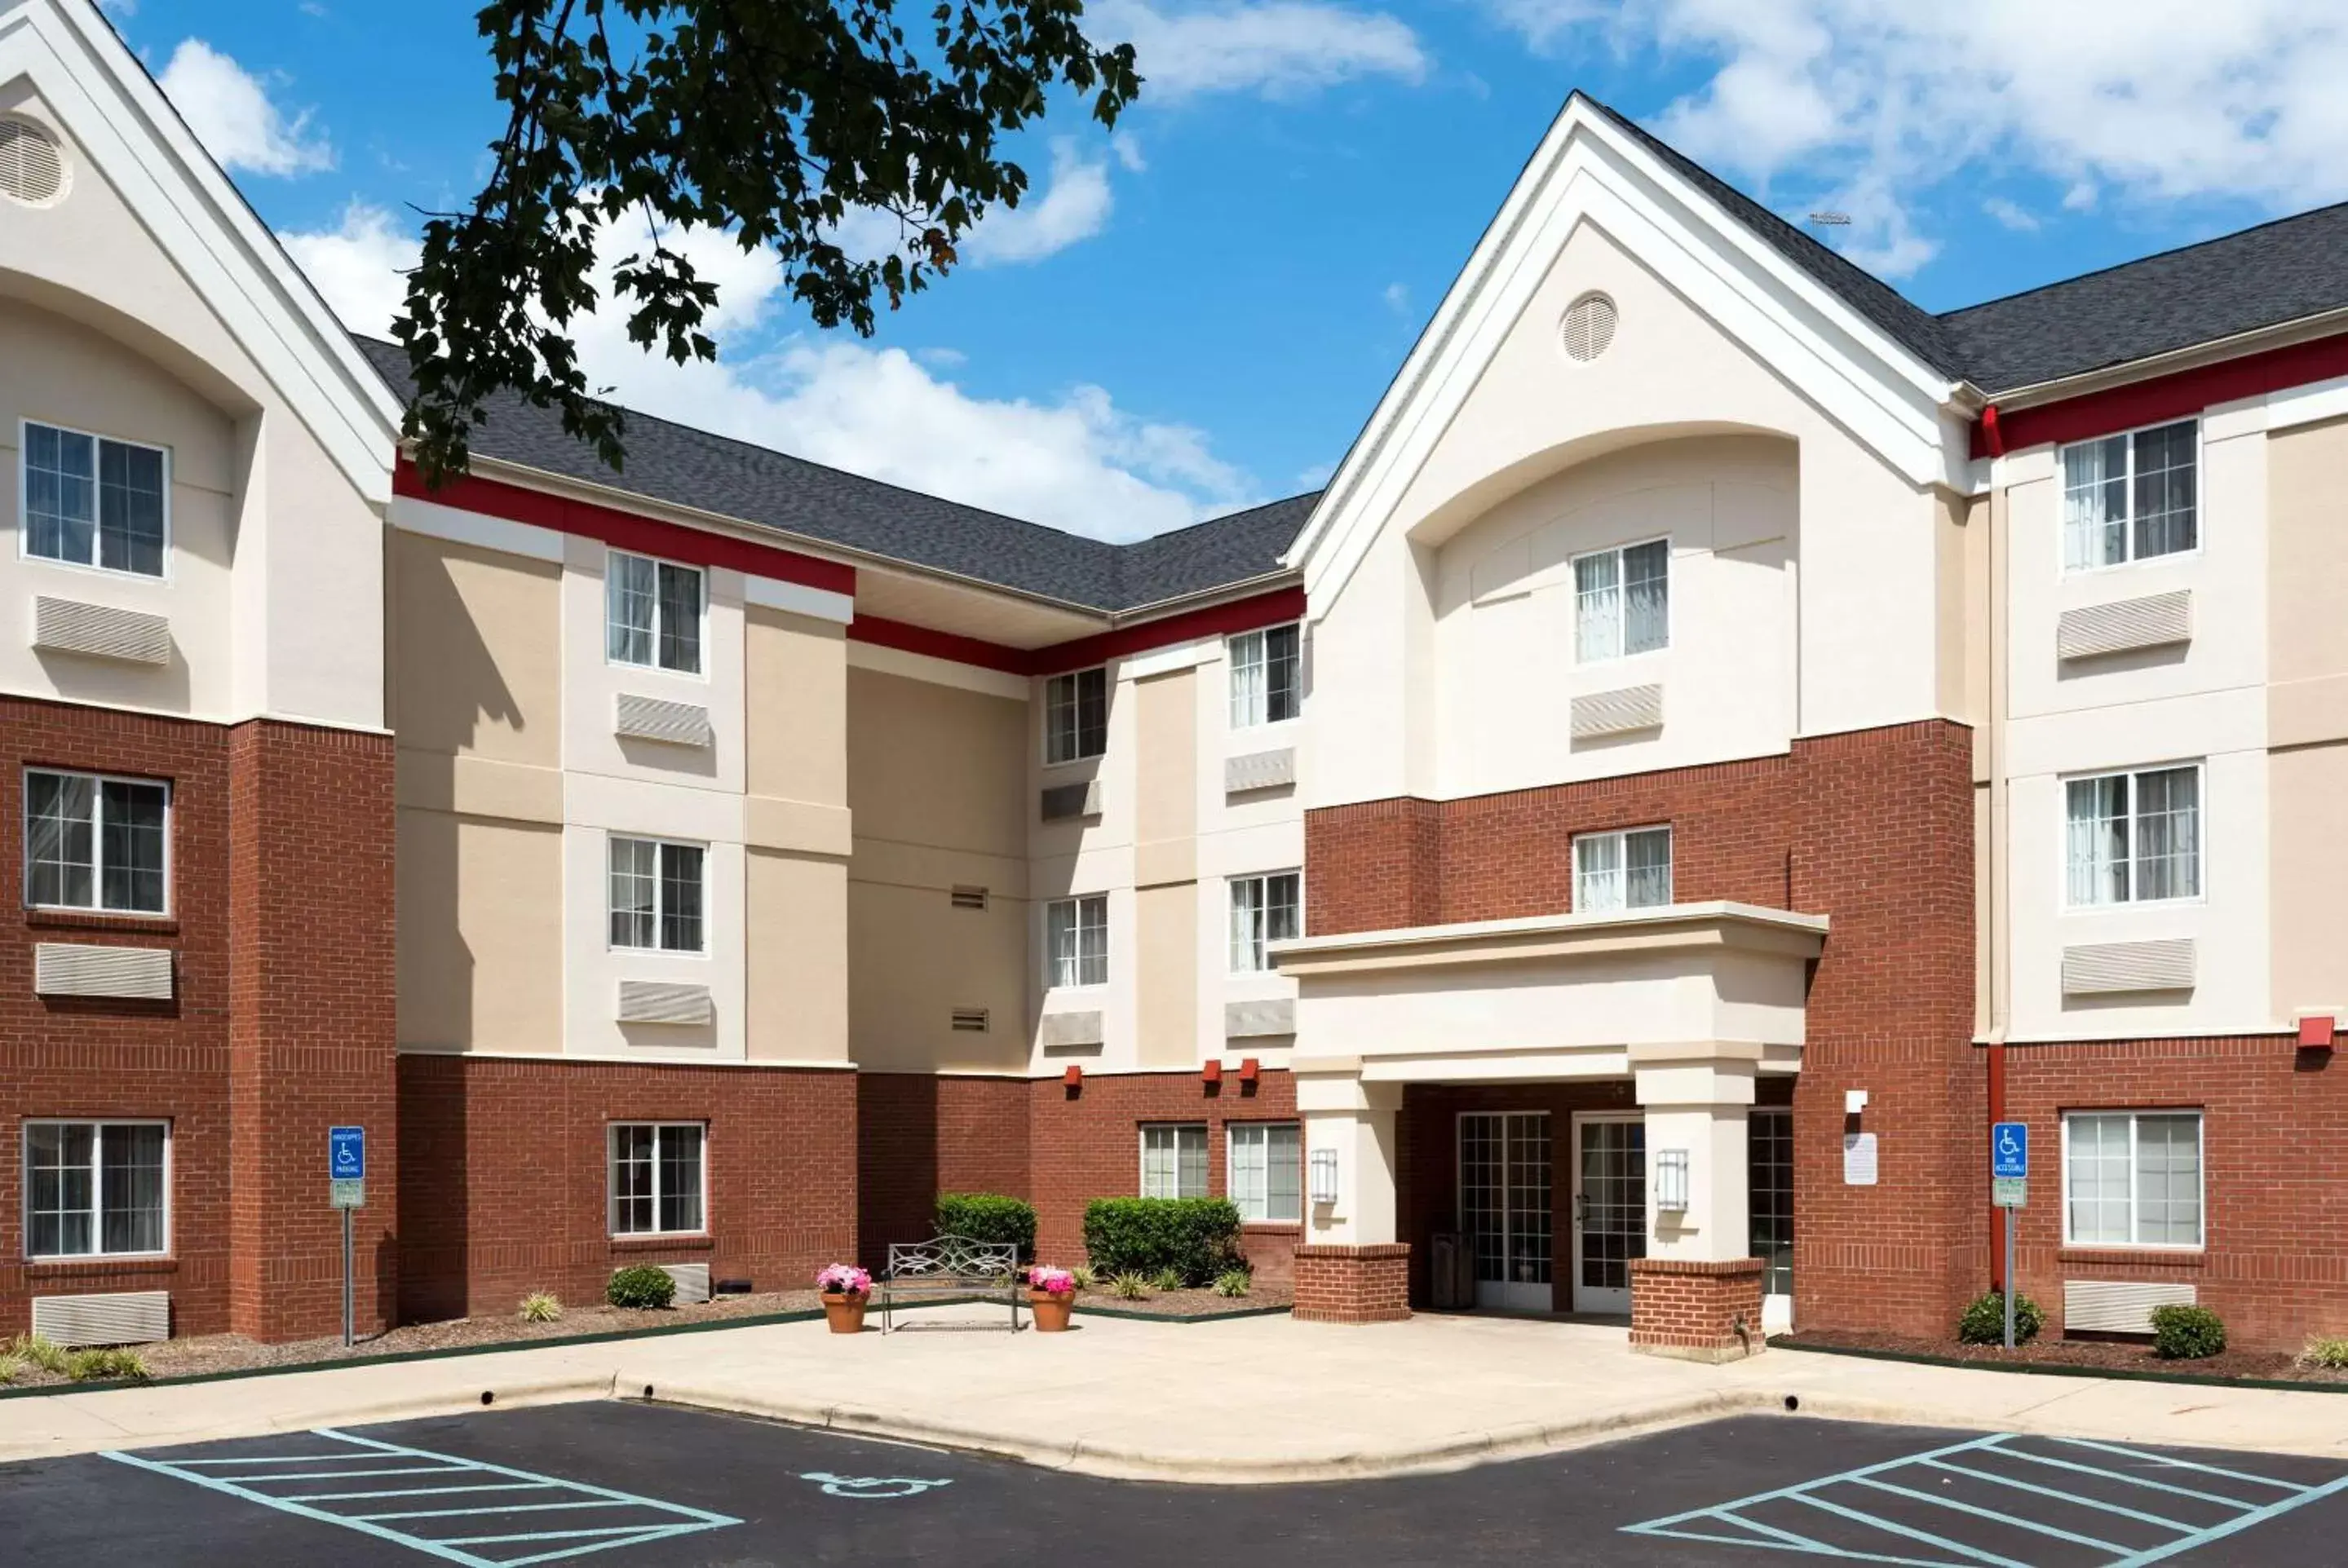 Property Building in MainStay Suites Raleigh - Cary